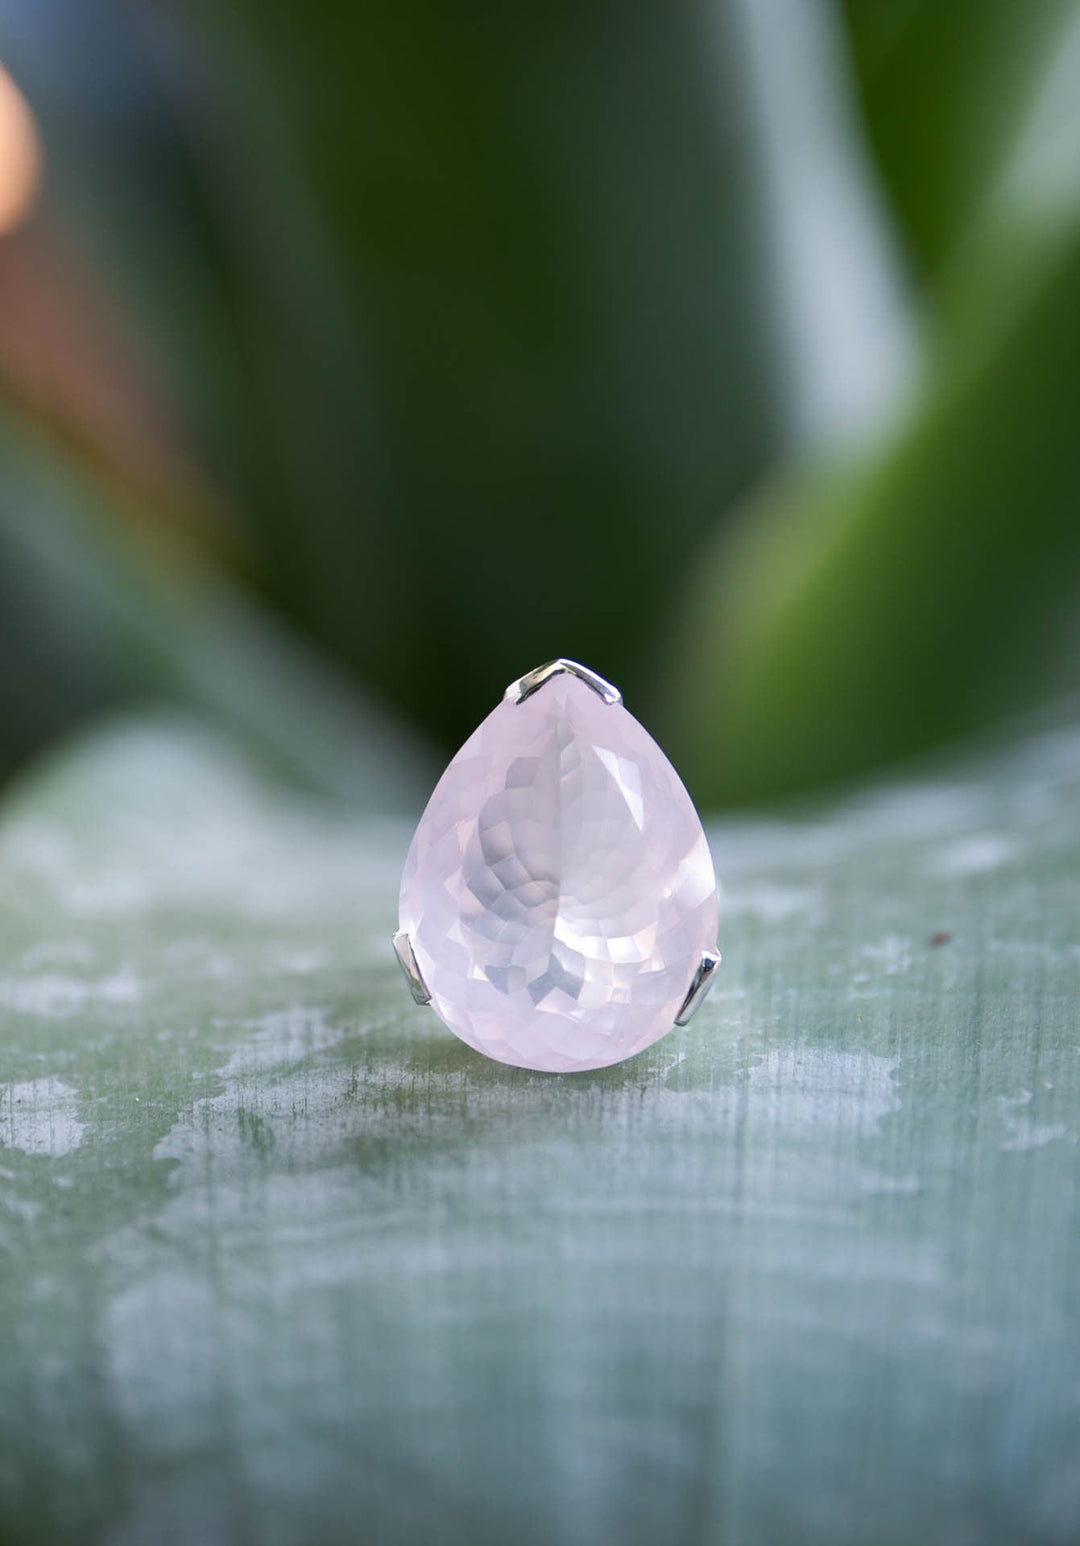 Teardrop Rose Quartz Ring in Sterling Silver Unique Setting - Size 9 US